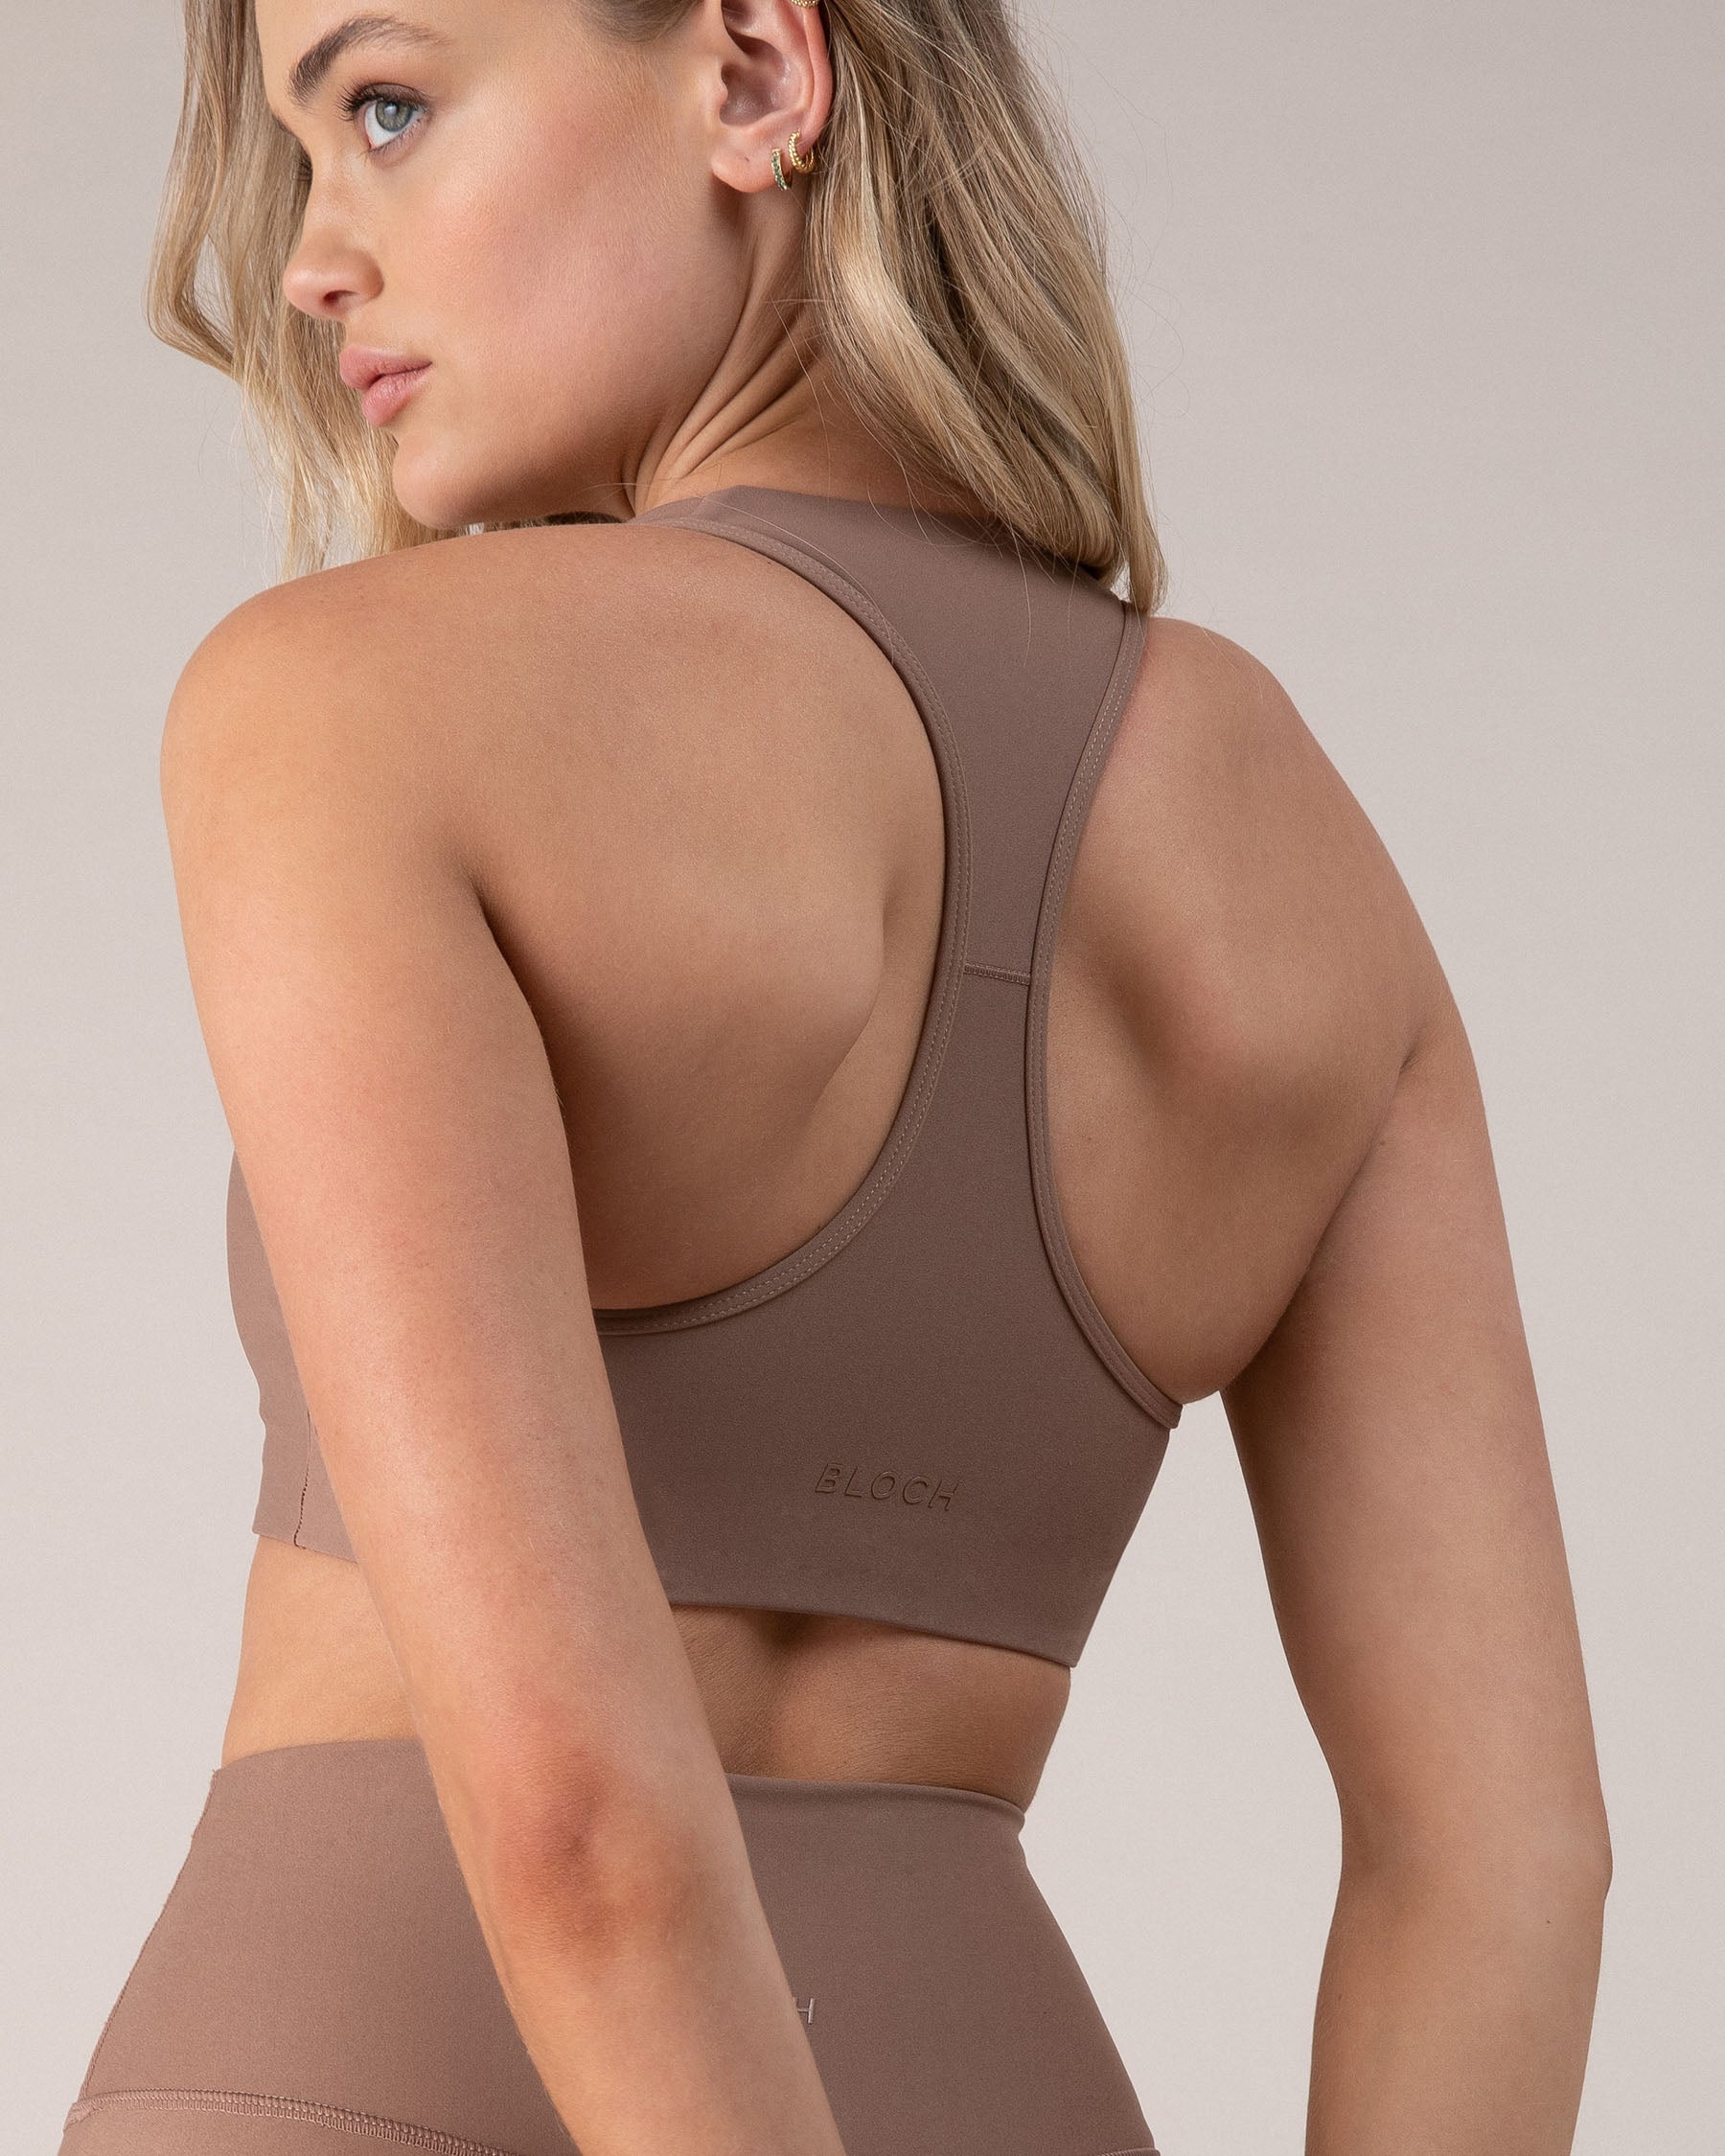 The racerback sports bra tanline is a classic >>>